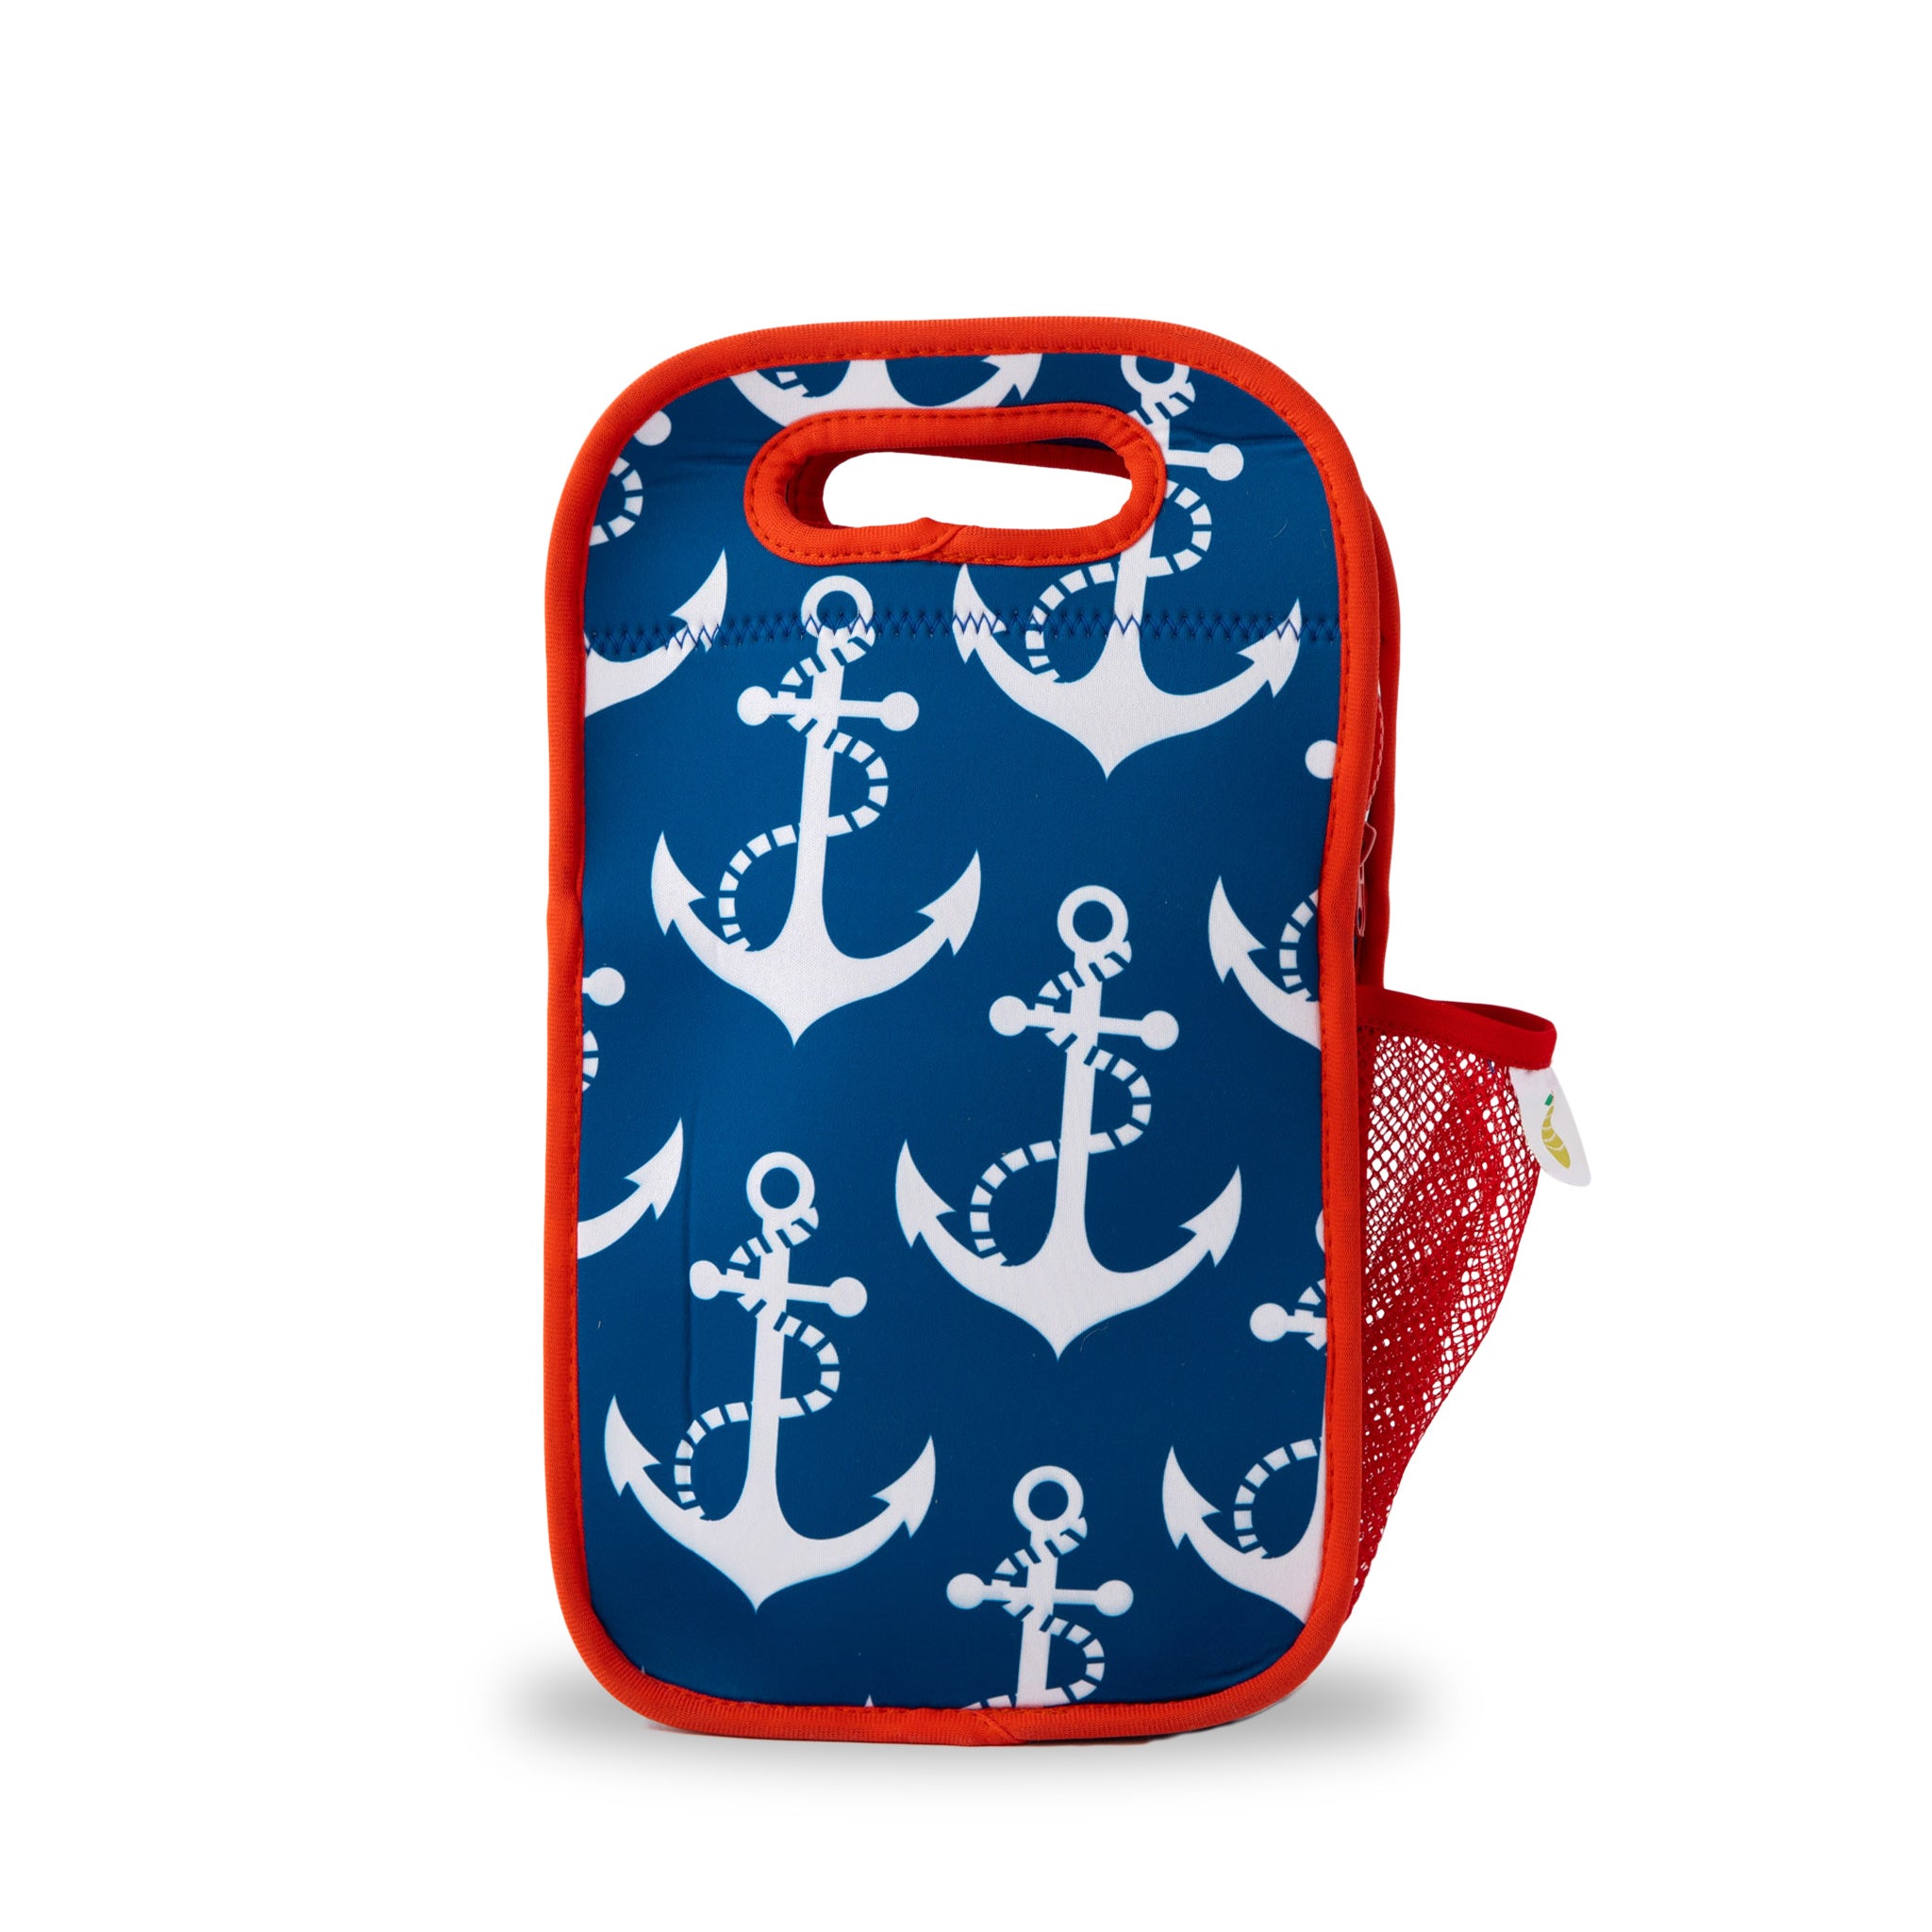 neoprene insulated lunch bag navy with white anchors and bright red binding - nudie rudie lunch box